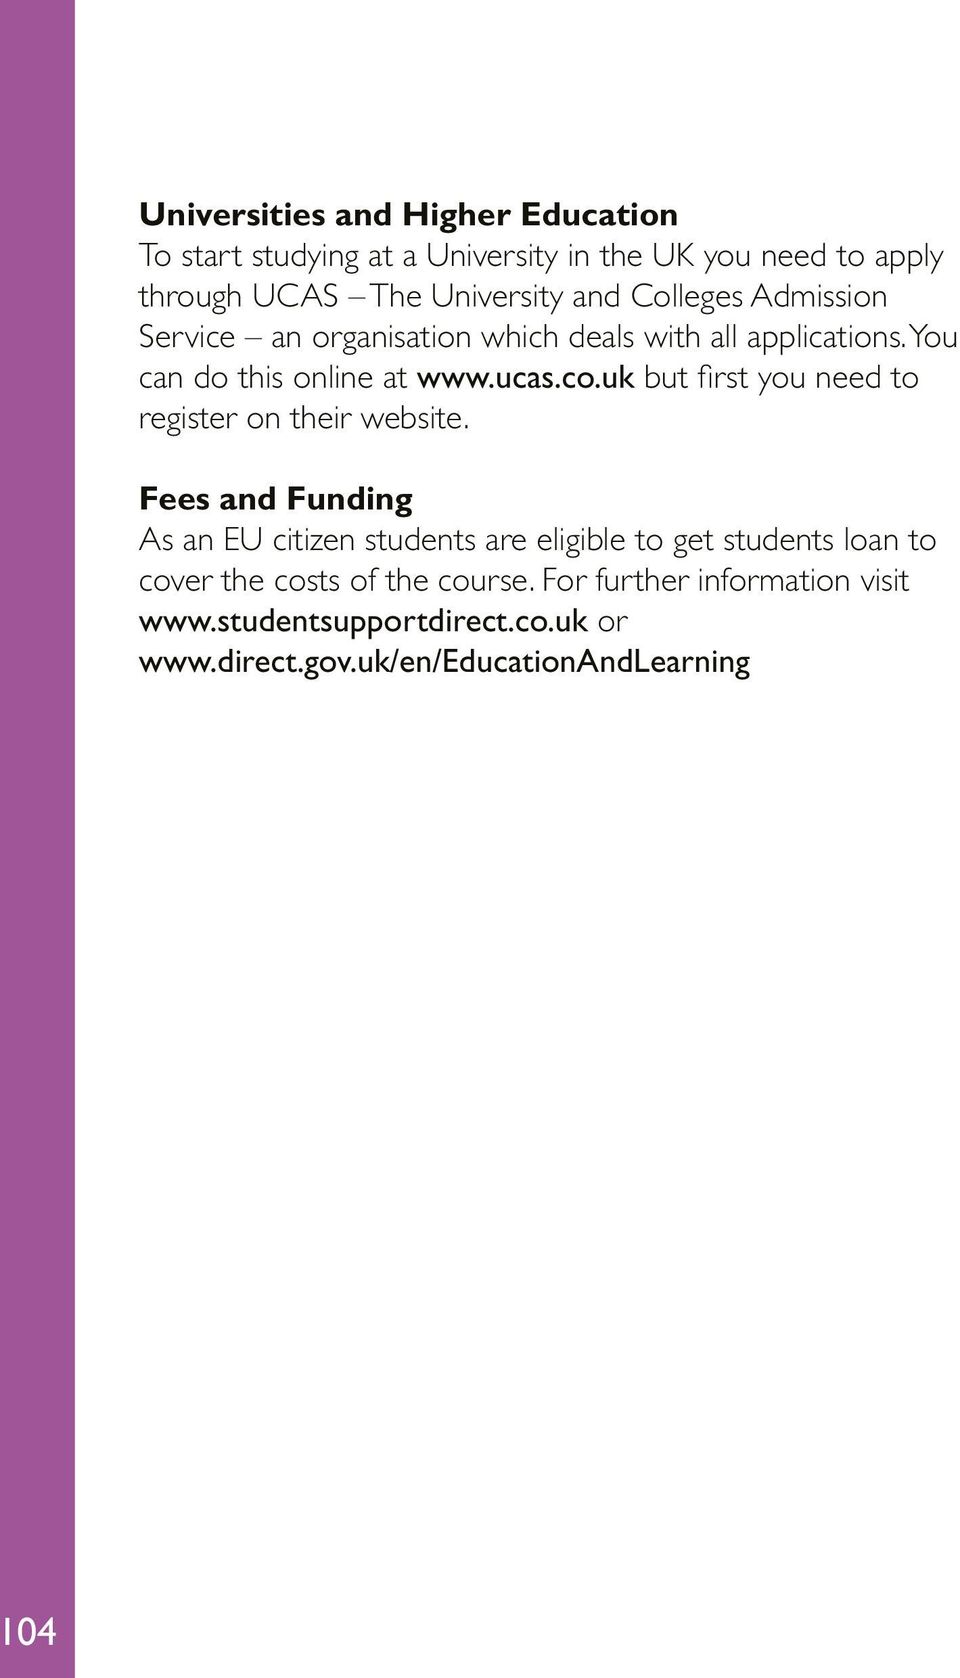 uk but first you need to register on their website.